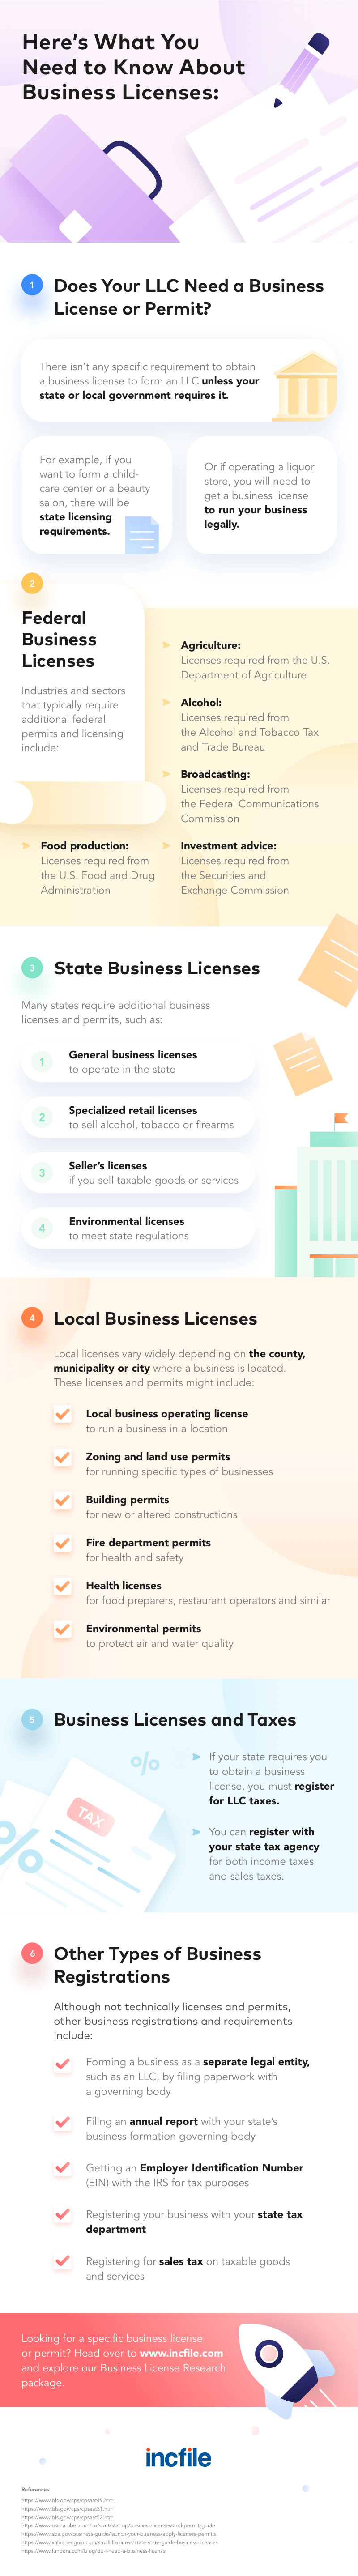 A Guide to Business Licenses: Infographic